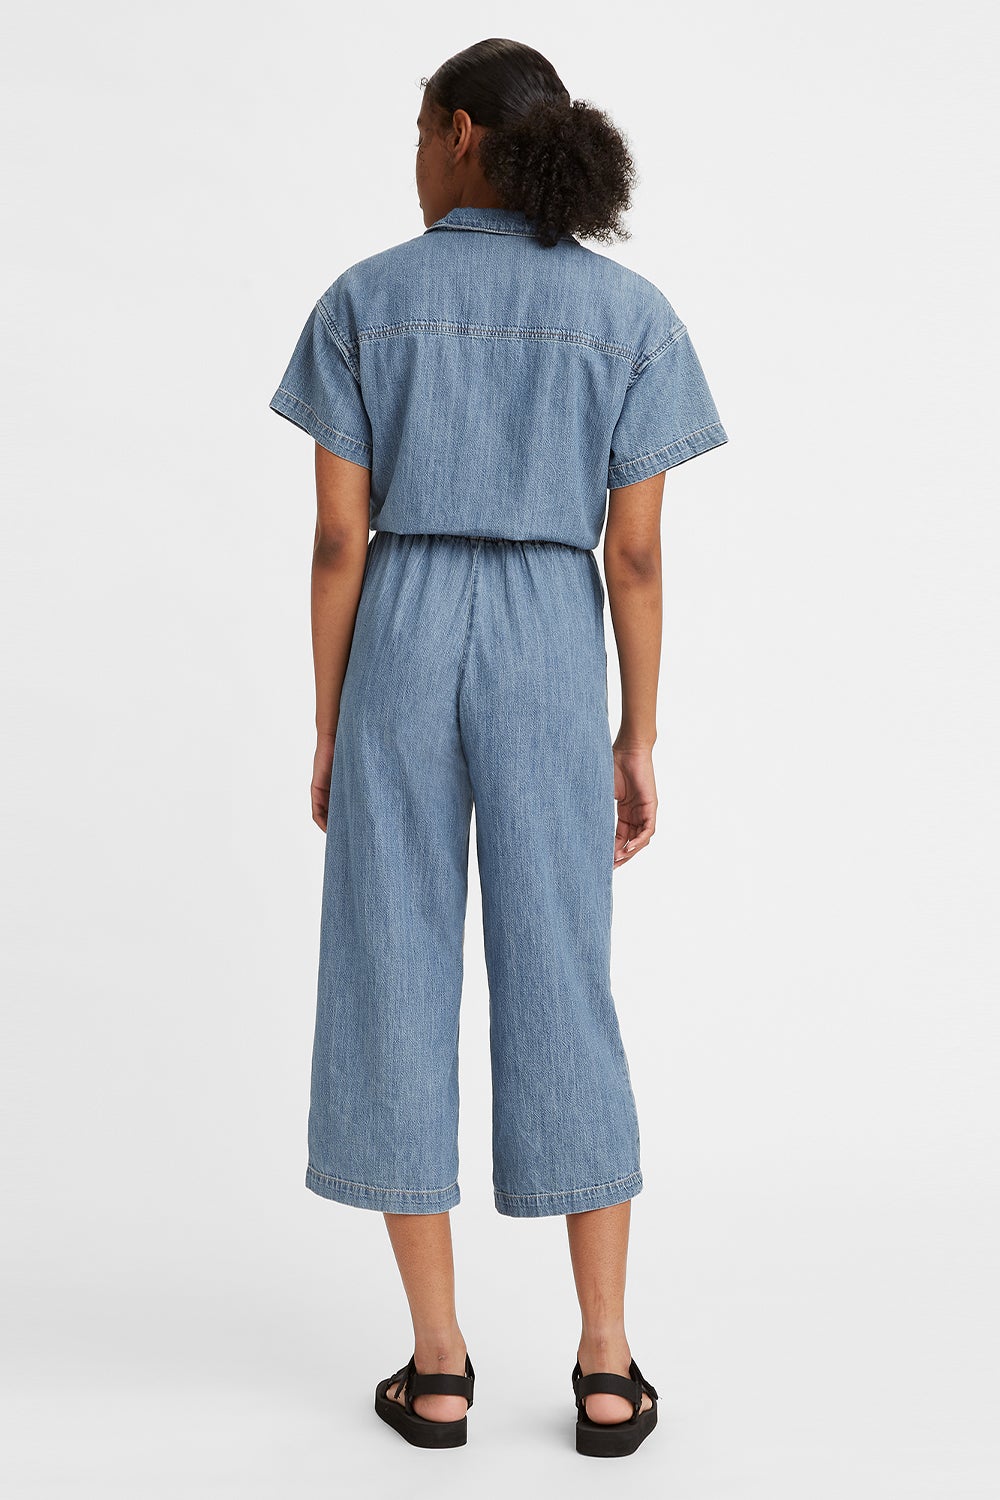 Levi's Cinched Jumpsuit Play Day